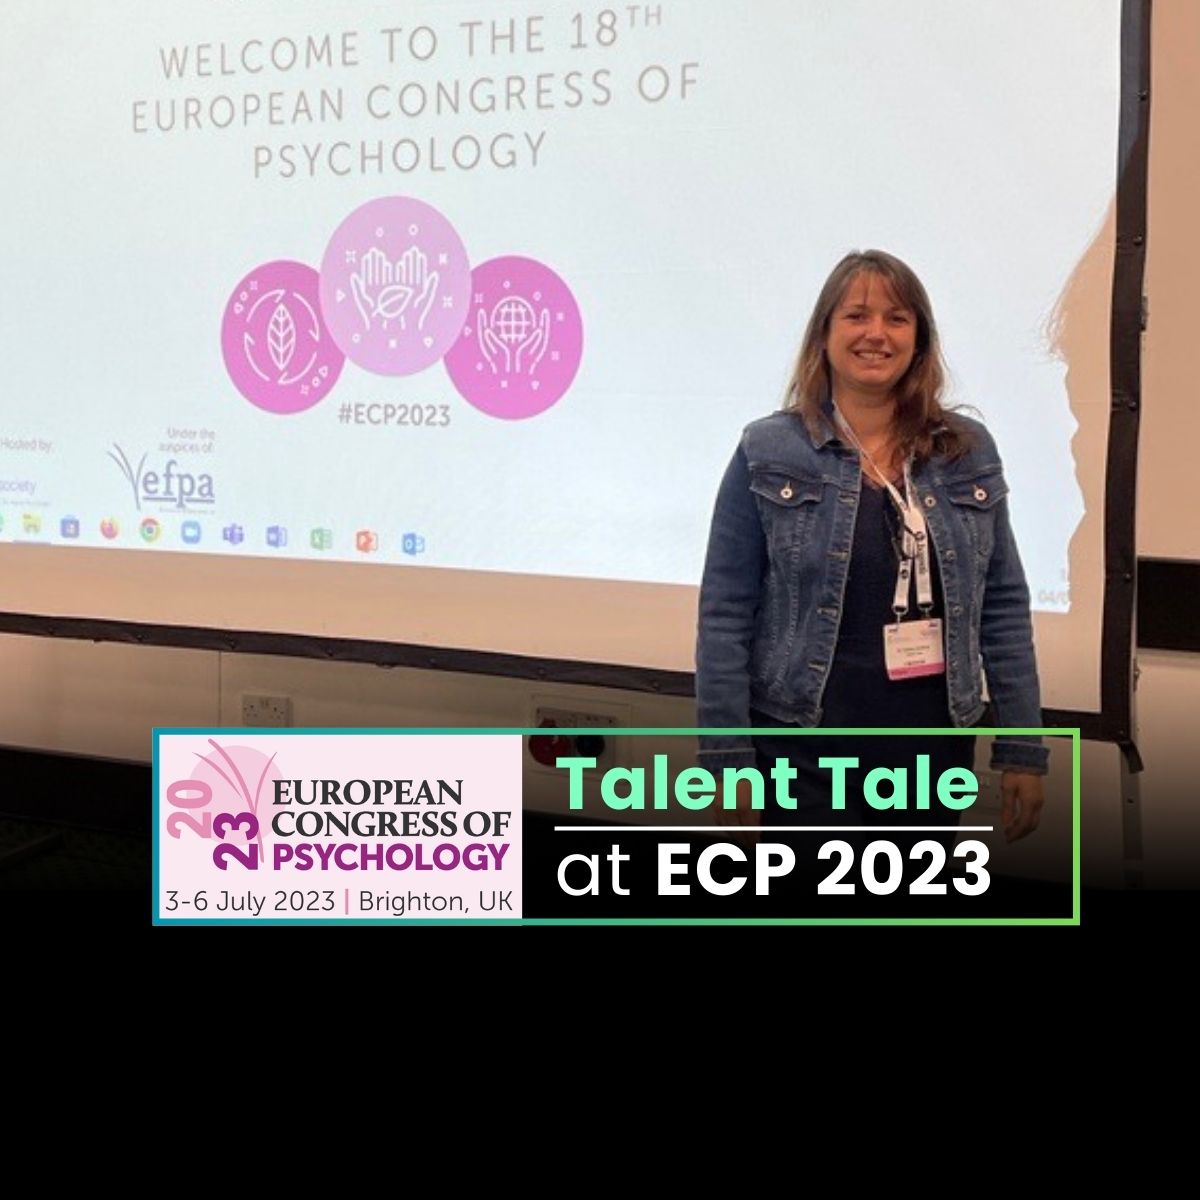 Talent Tale was present at the European Congress of Psychology in Brighton, UK, July 3-6